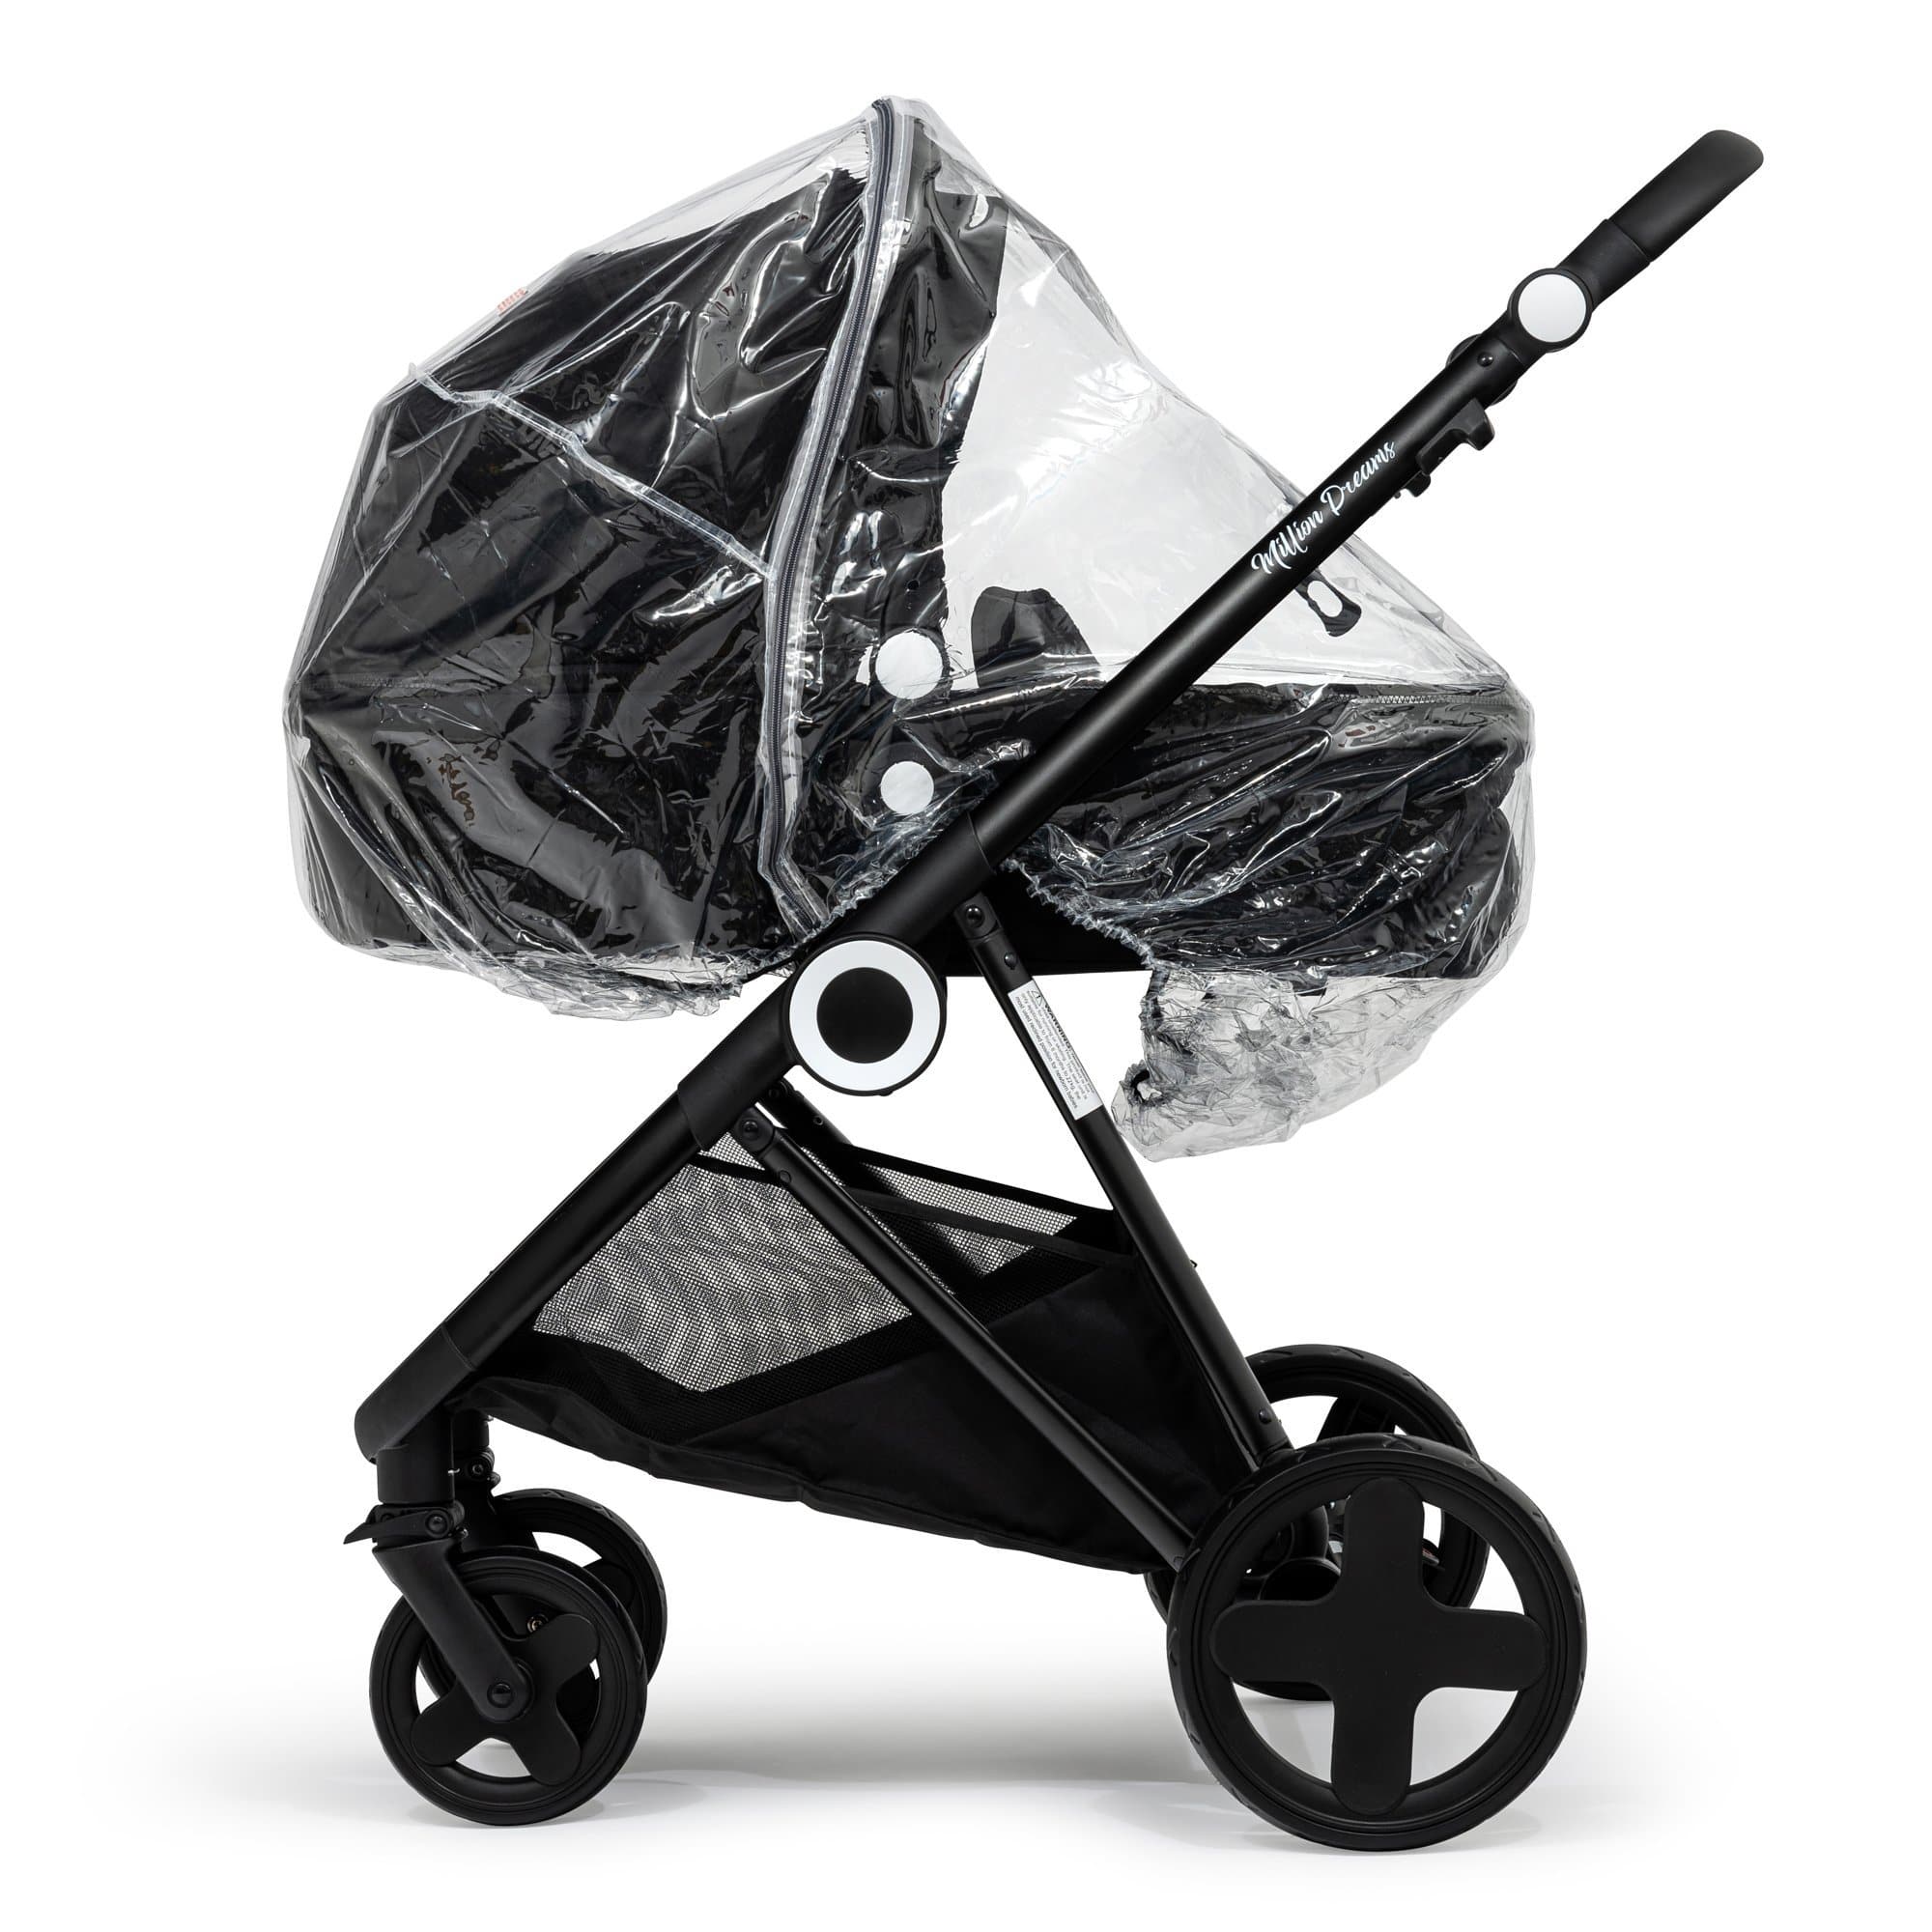 2 in 1 Rain Cover Compatible with Babyzen - Fits All Models -  | For Your Little One